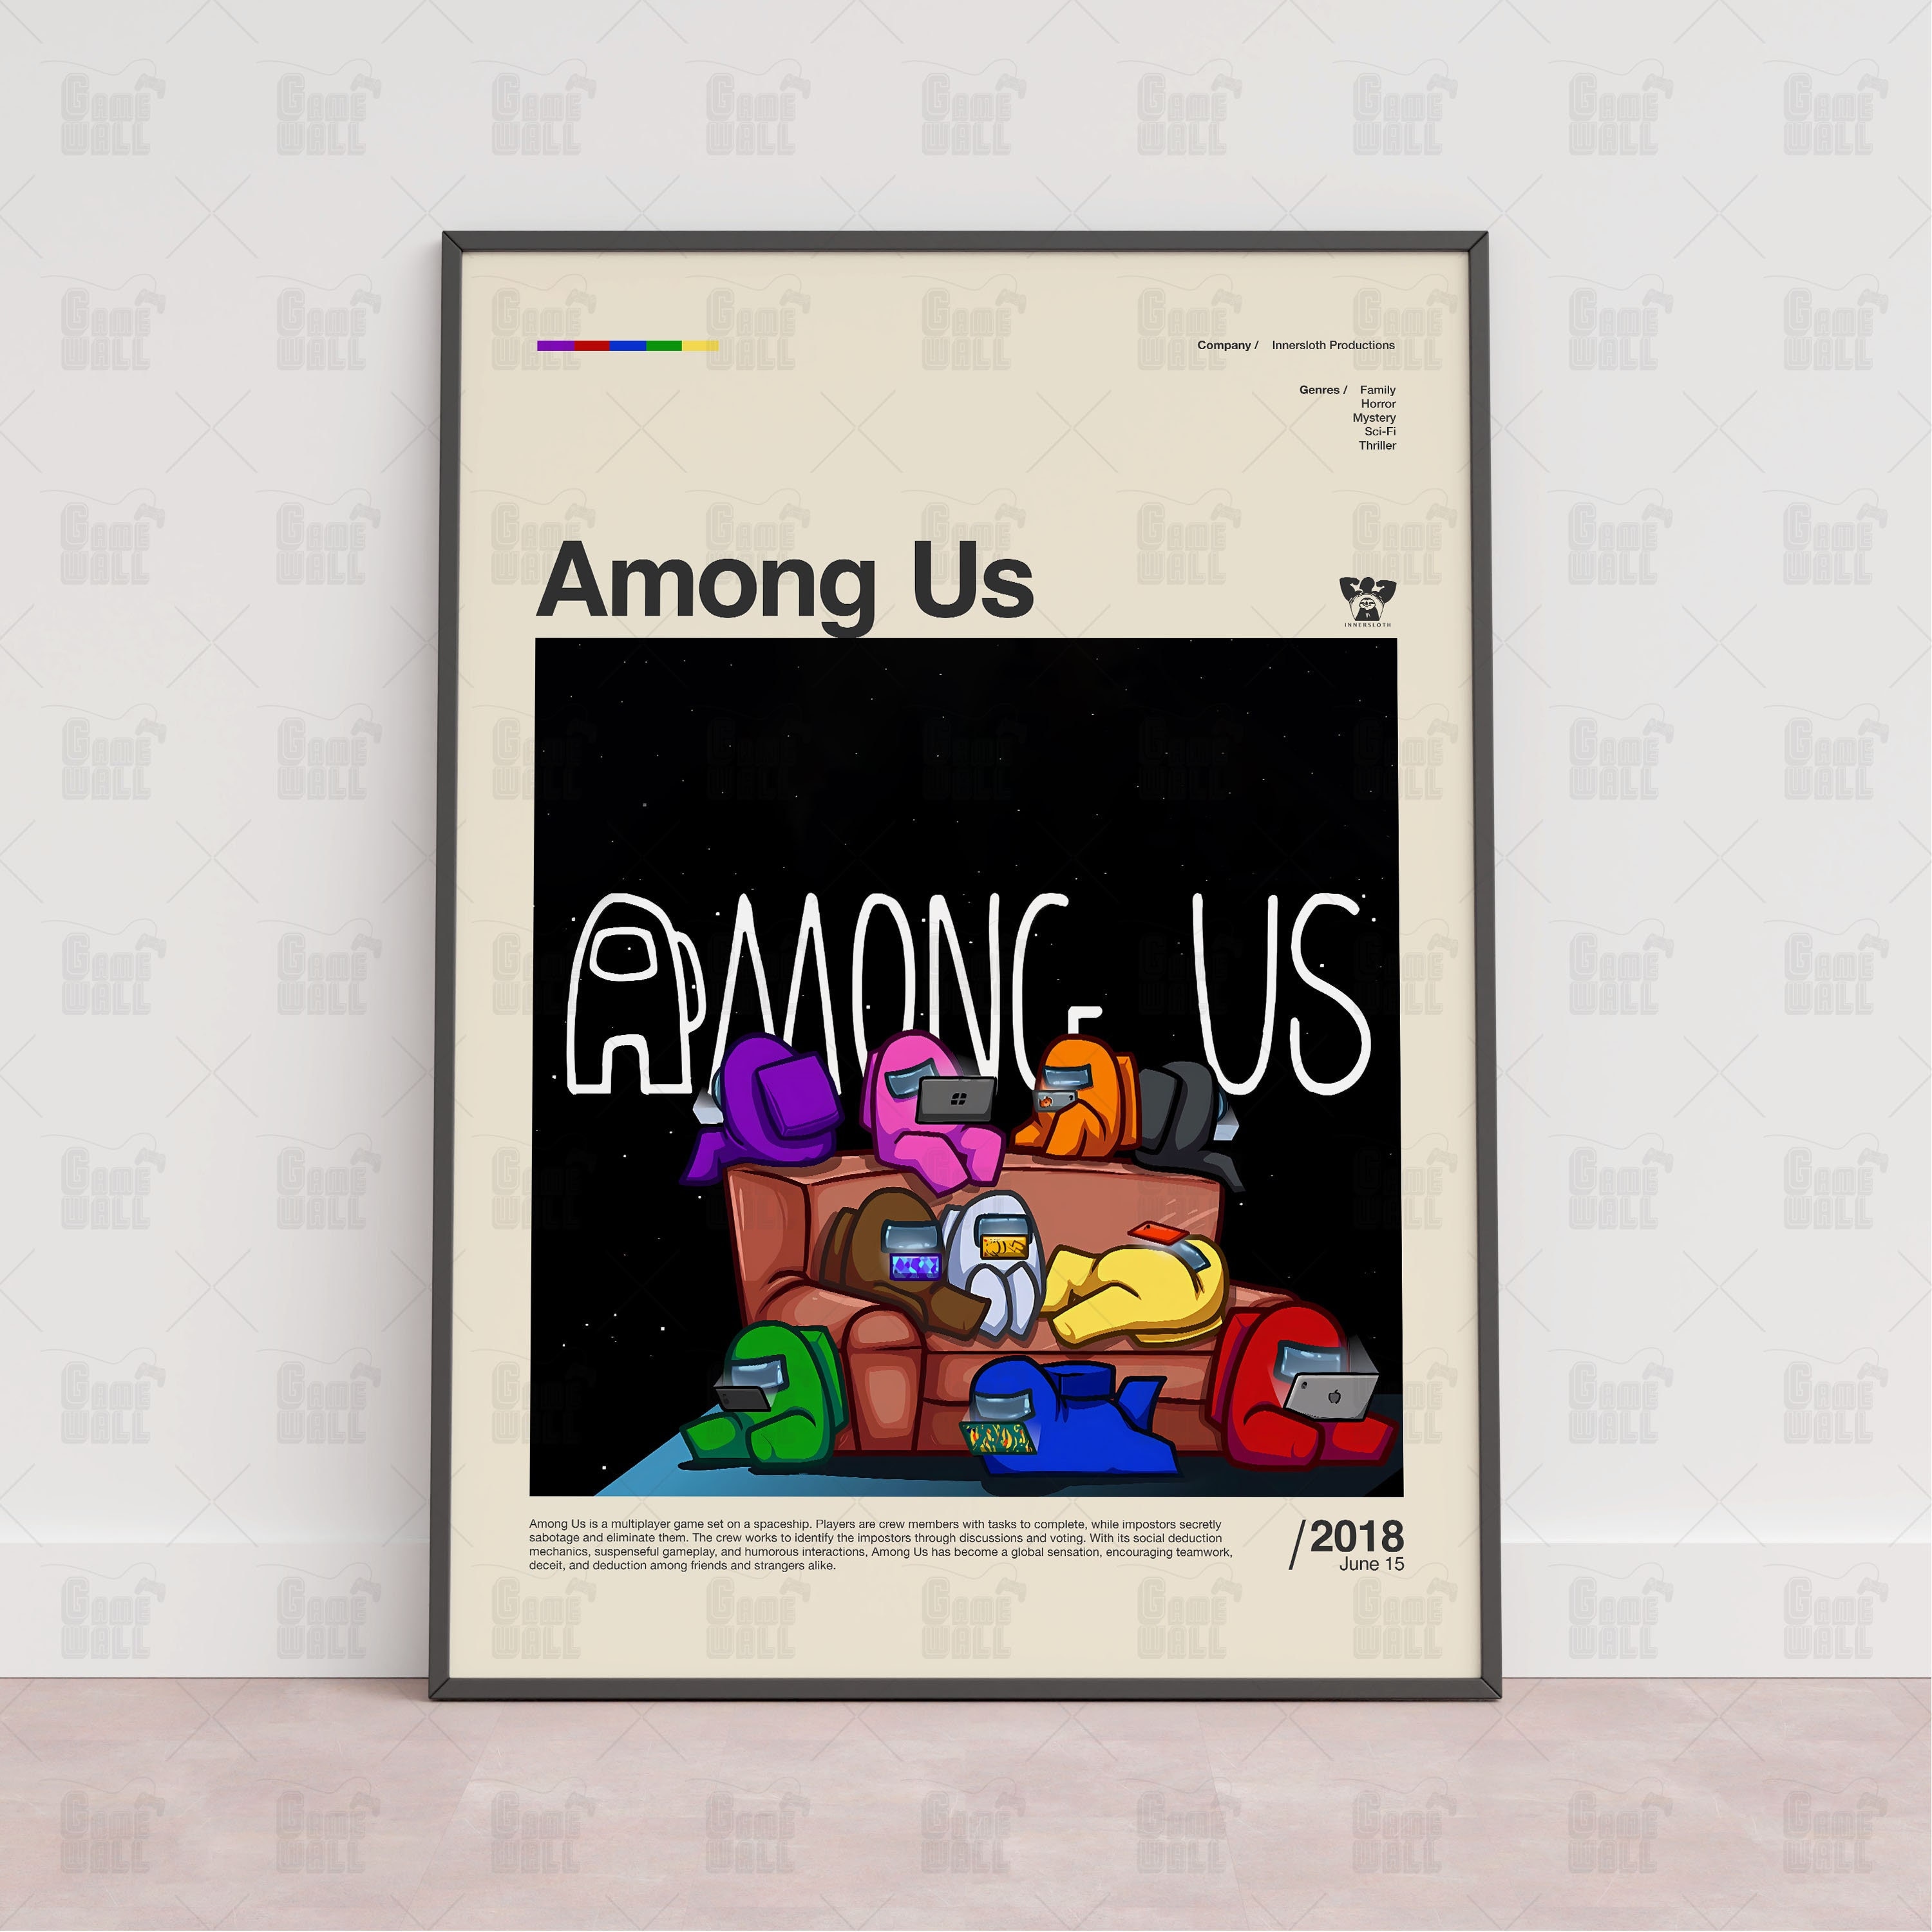 Among Us: Thicc Sus - Meme - Posters and Art Prints